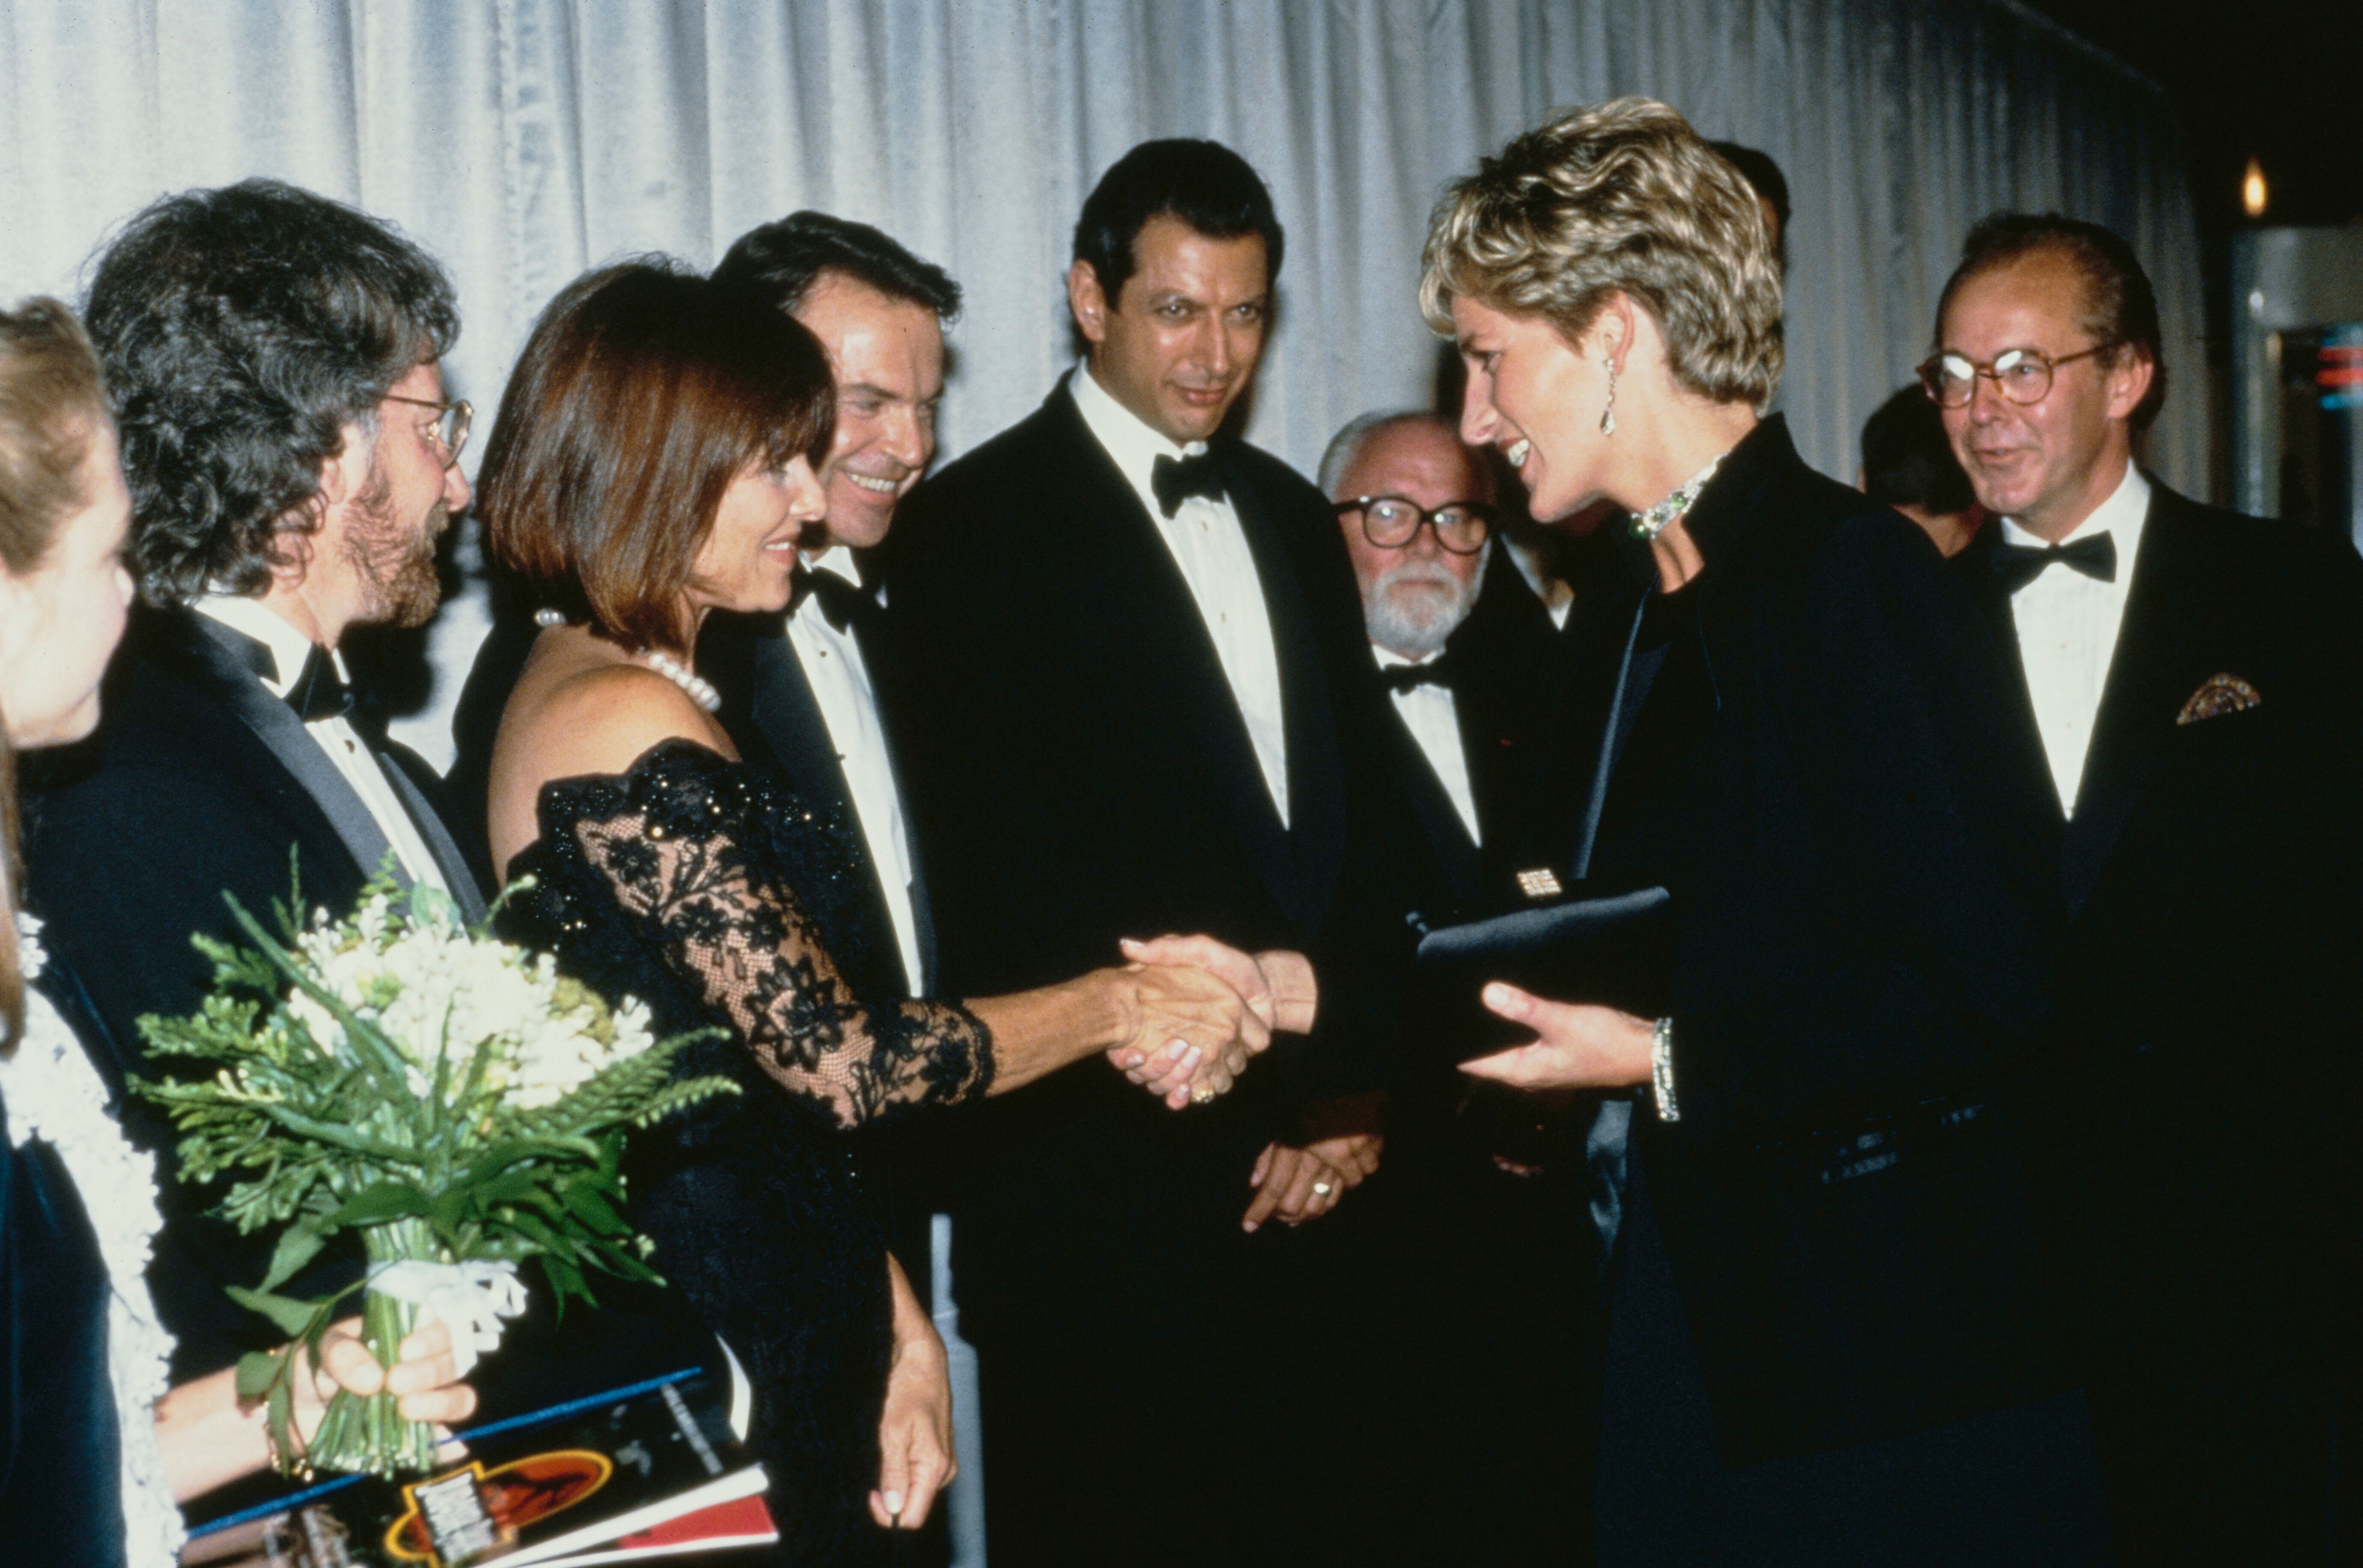 Diana, Princess of Wales (1961 - 1997) attends the premiere of the Steven Spielberg film 'Jurassic Park' in London, 15th July 1993. From left to right, she is meeting star Ariana Richards, director Spielberg and his wife Kate Capshaw, and stars Sam Neill, Jeff Goldblum and Richard Attenborough. (Photo by Princess Diana Archive/Getty Images)